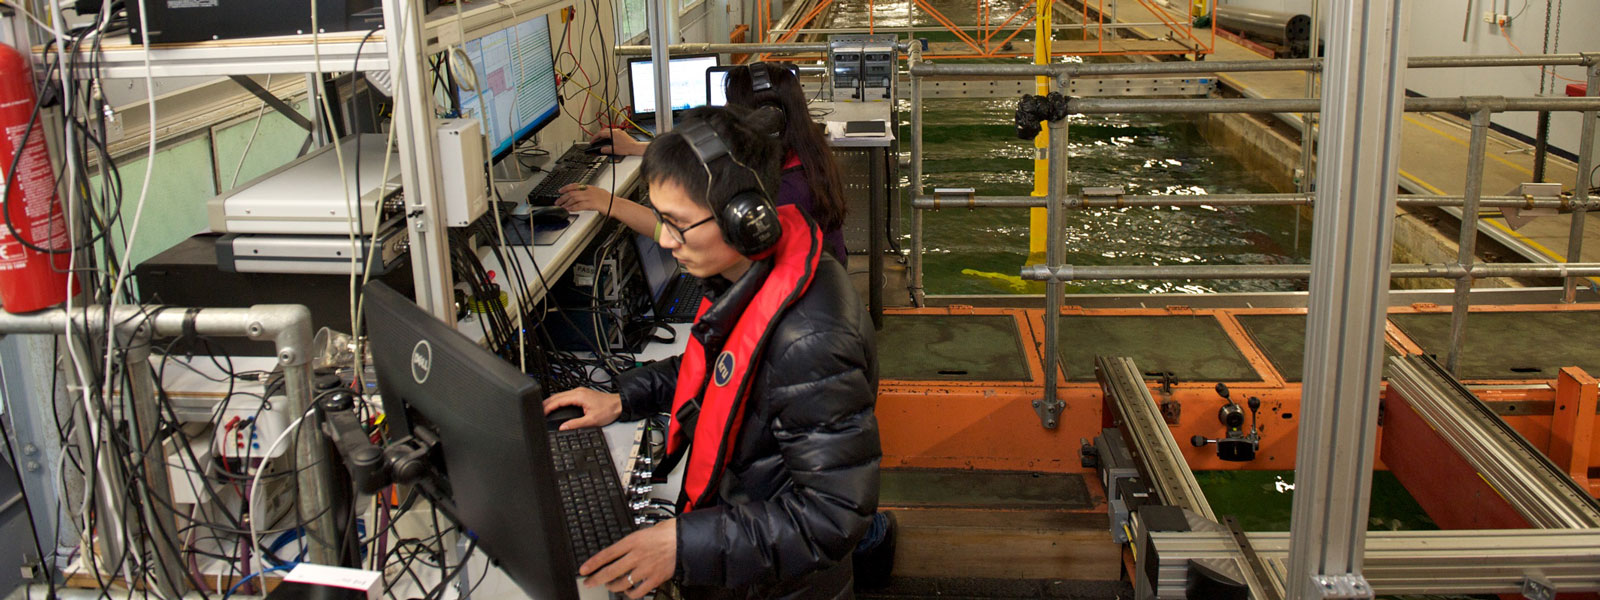 students analyse data on a computer on a platform over the water tank